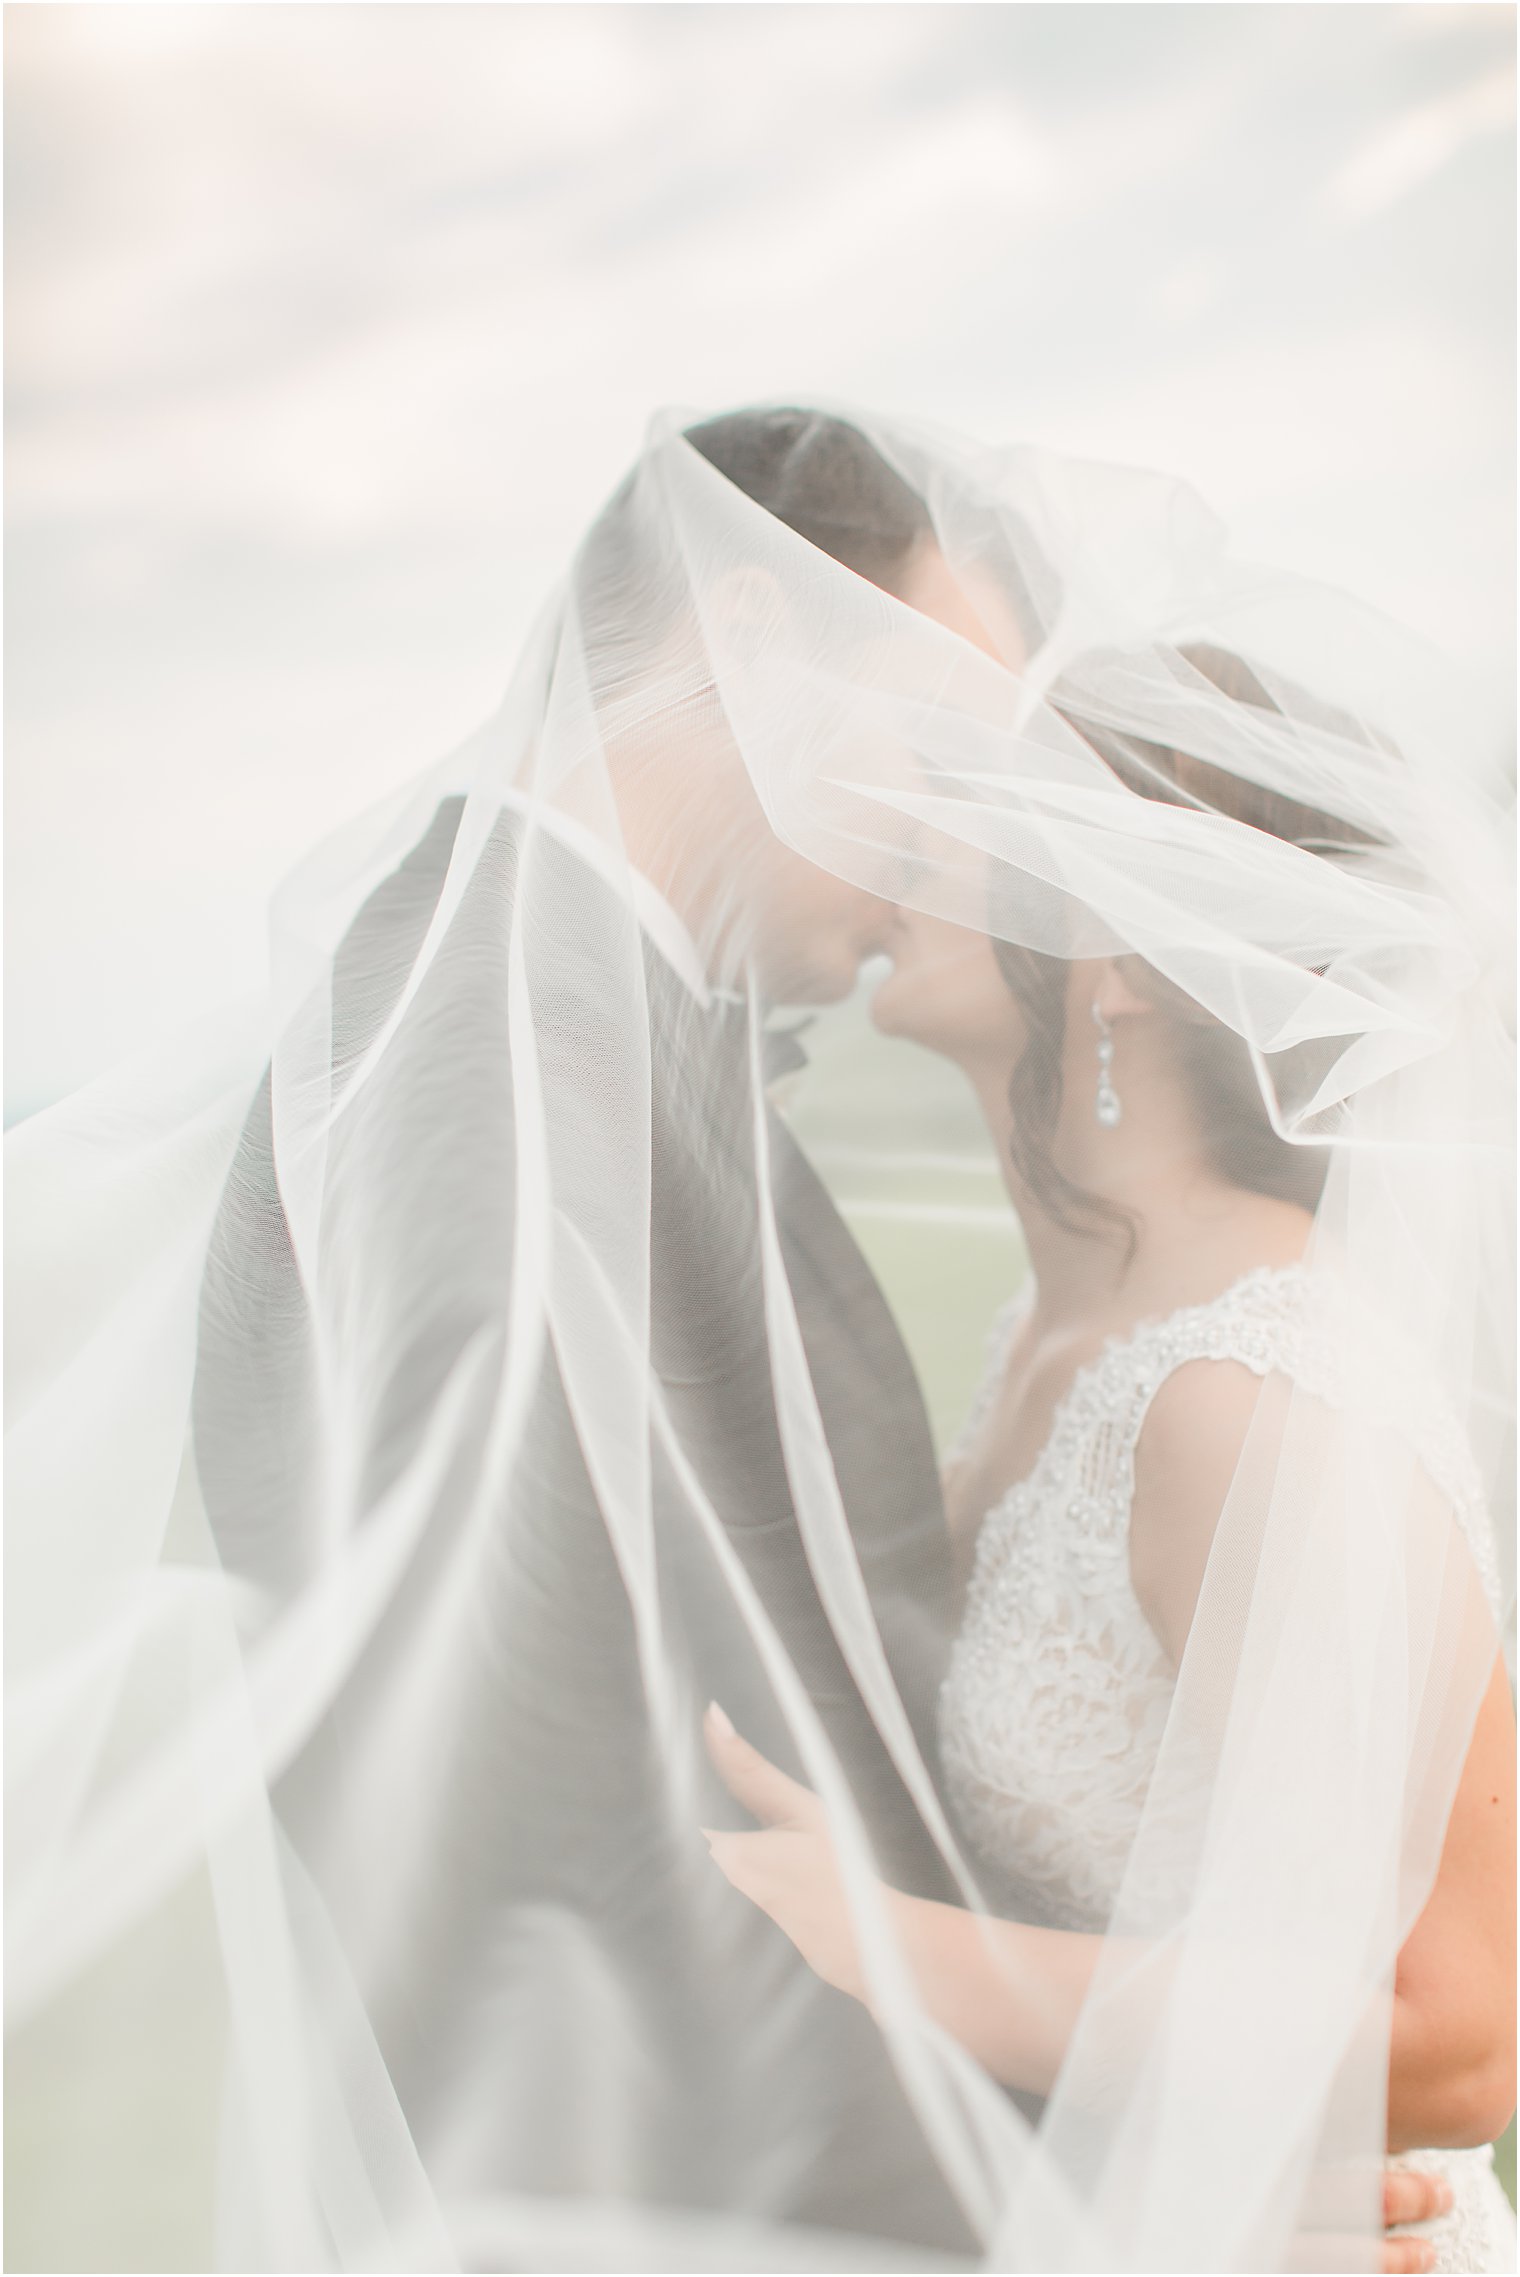 Romantic photo of bride and groom under the veil 